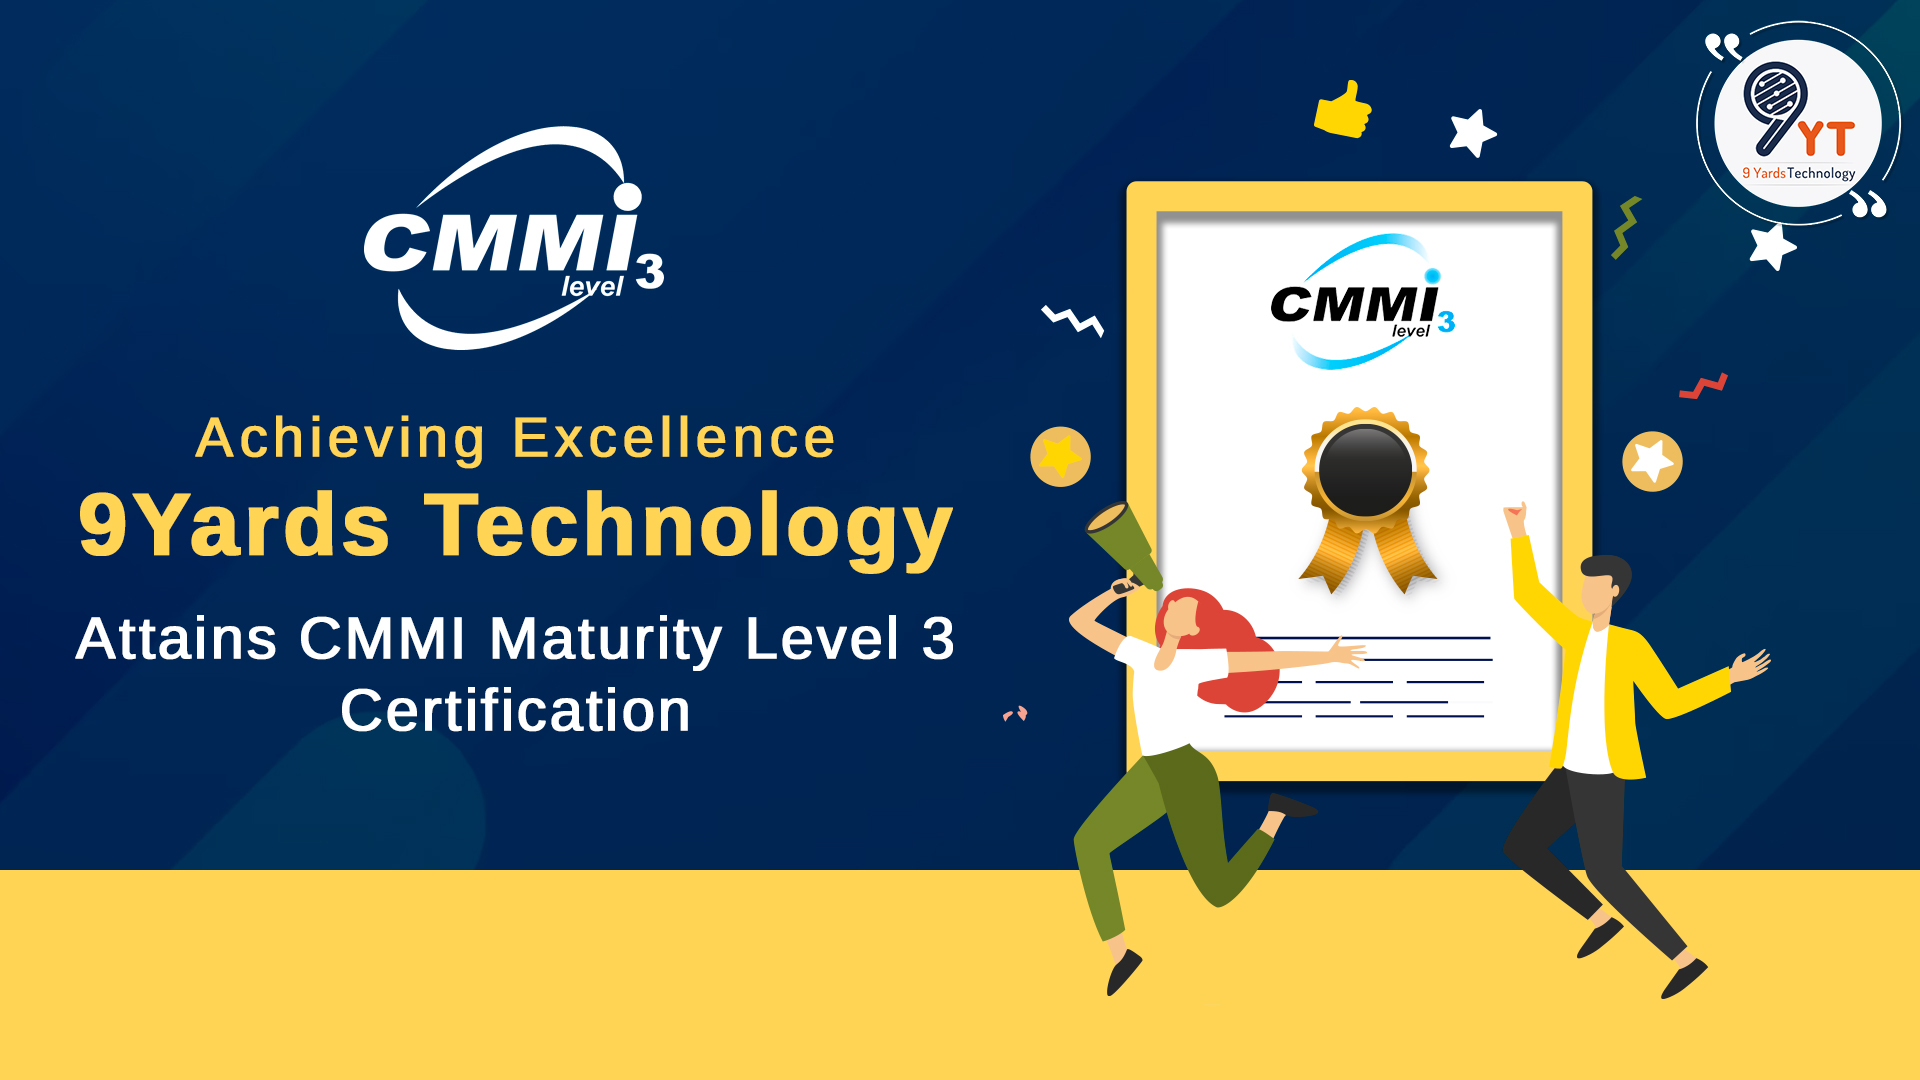 Achieving Excellence: 9Yards Technology Attains CMMI Maturity Level 3 Certification